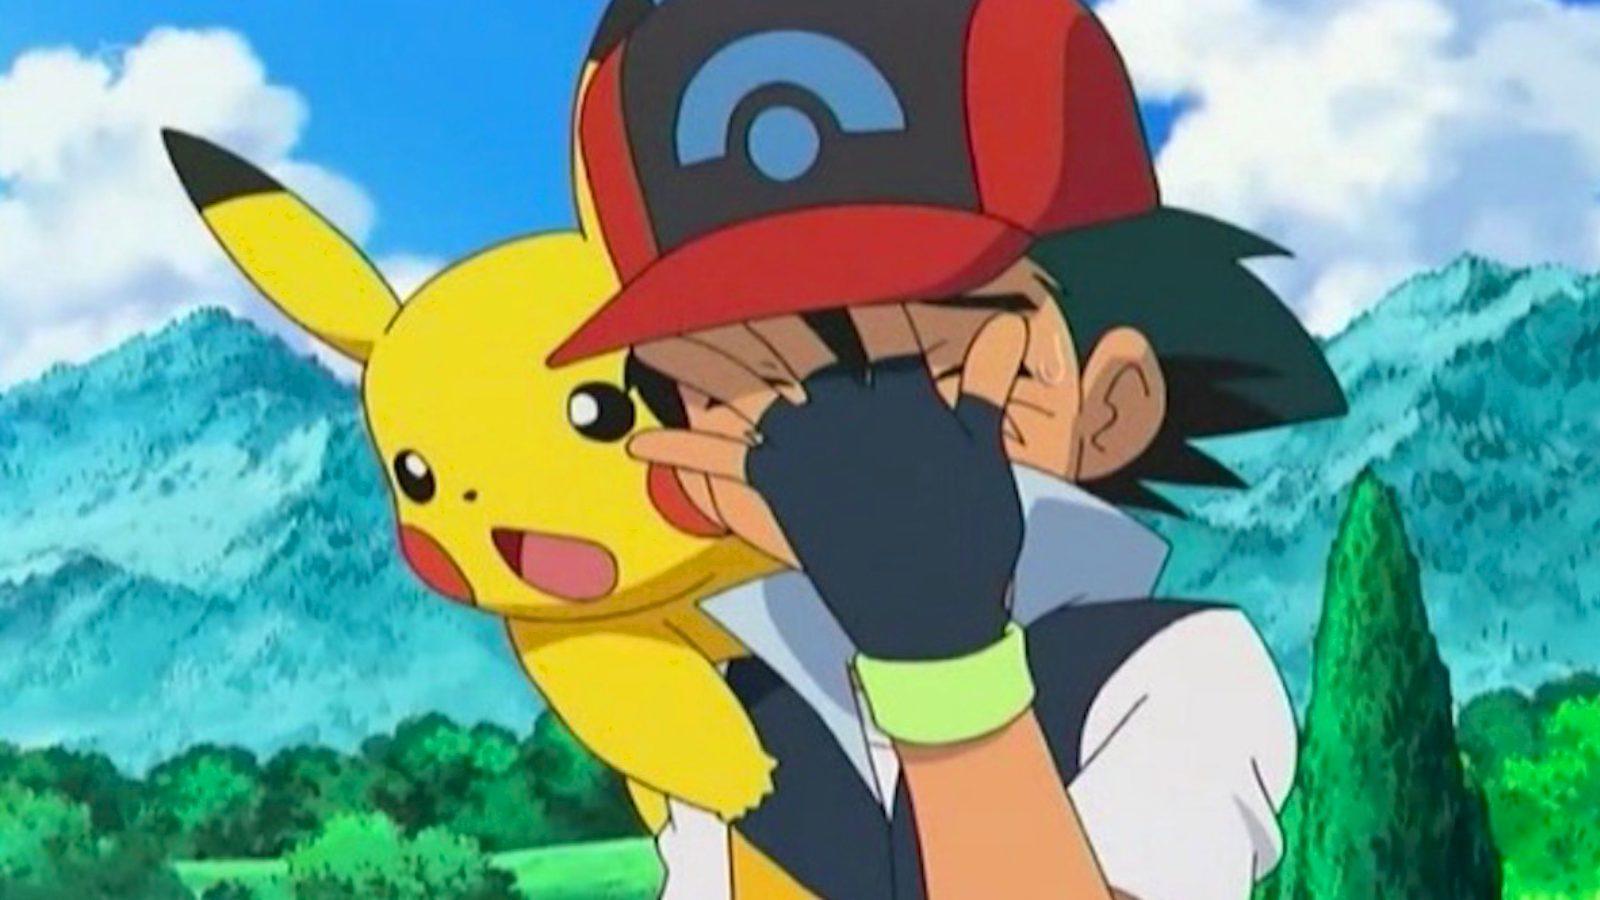 Pokemon's Ash Ketchum being dissapointed.